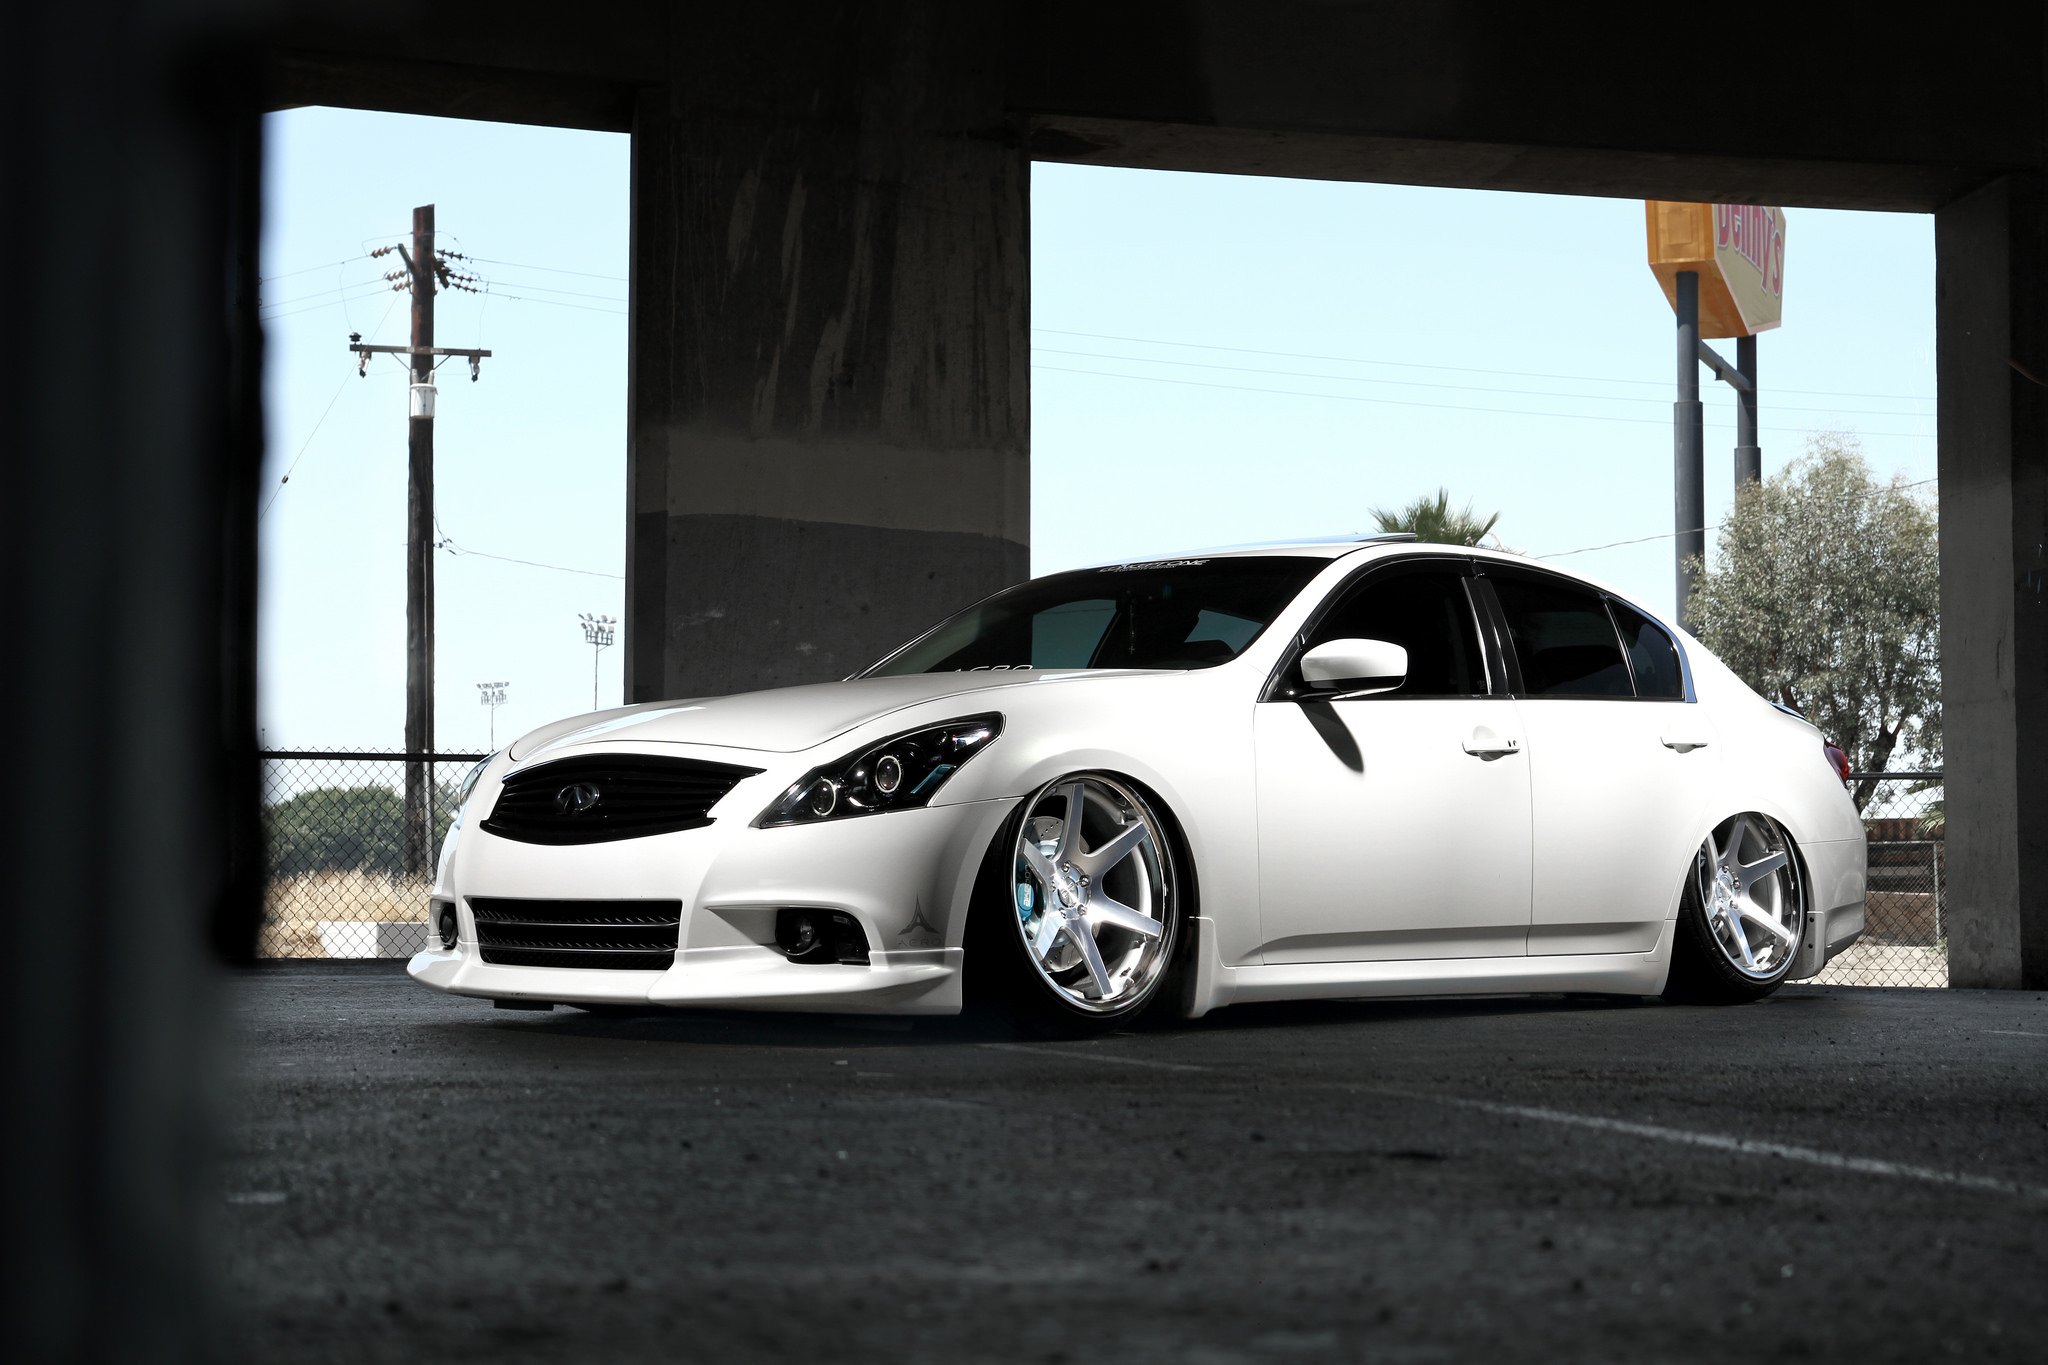 White Stanced Infiniti G37 with Aftermarket Headlights - Photo by Concept One